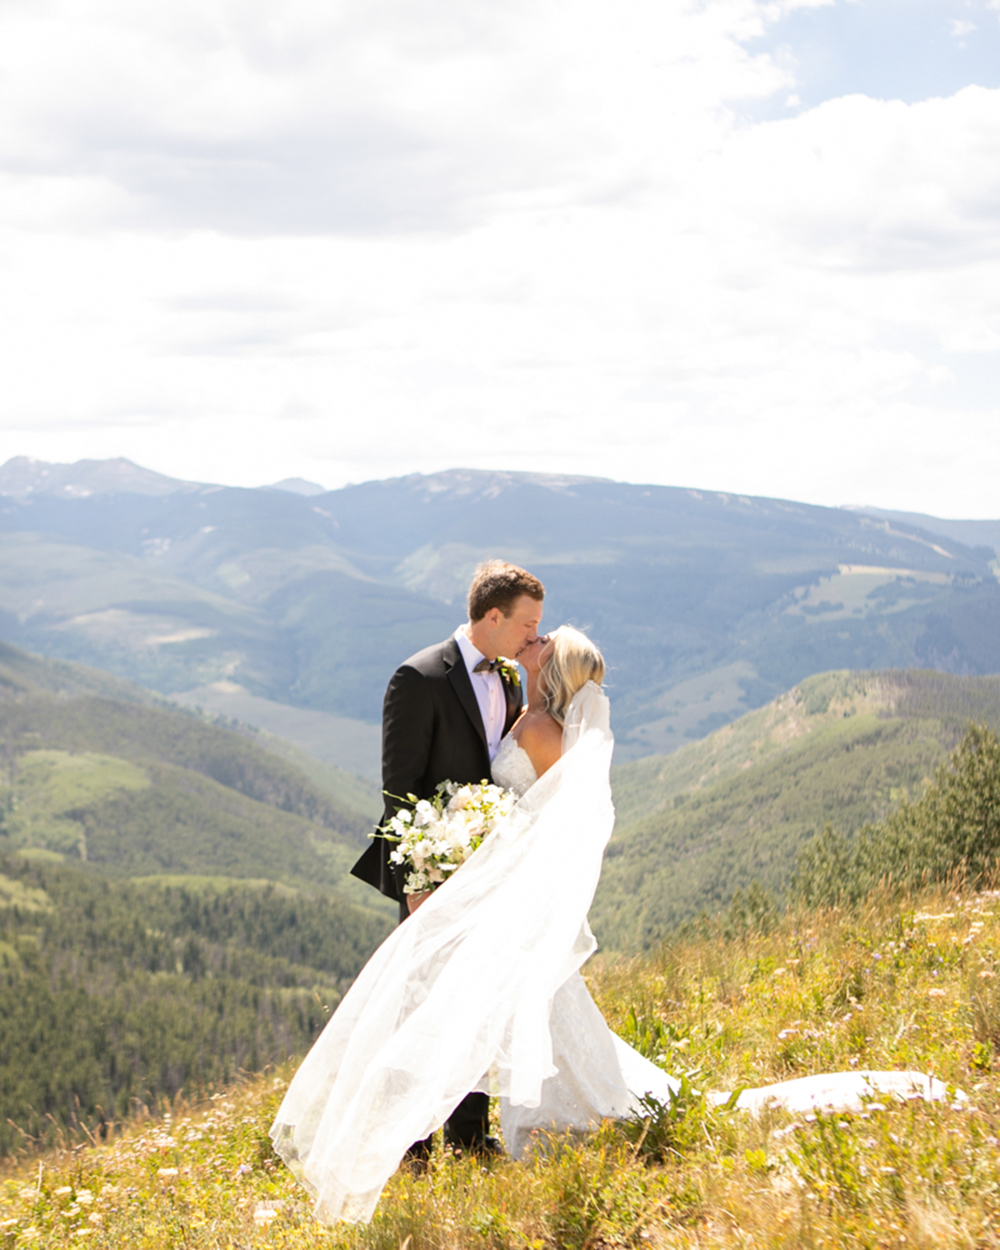 Lauren and Mack Married in the Mountains